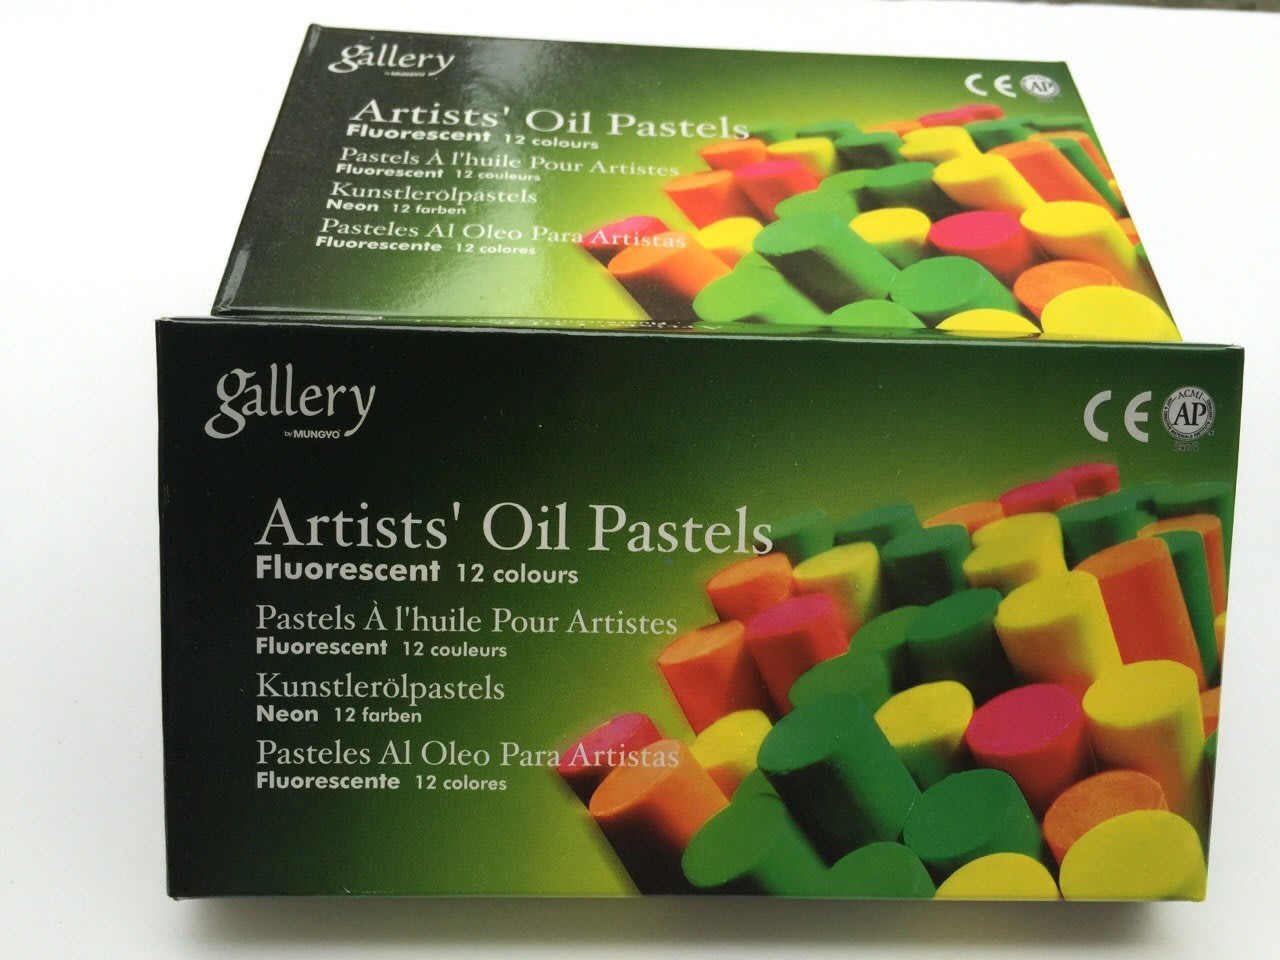 Mungyo Gallery Artists' Oil Pastel Fluorescent 12 Colours